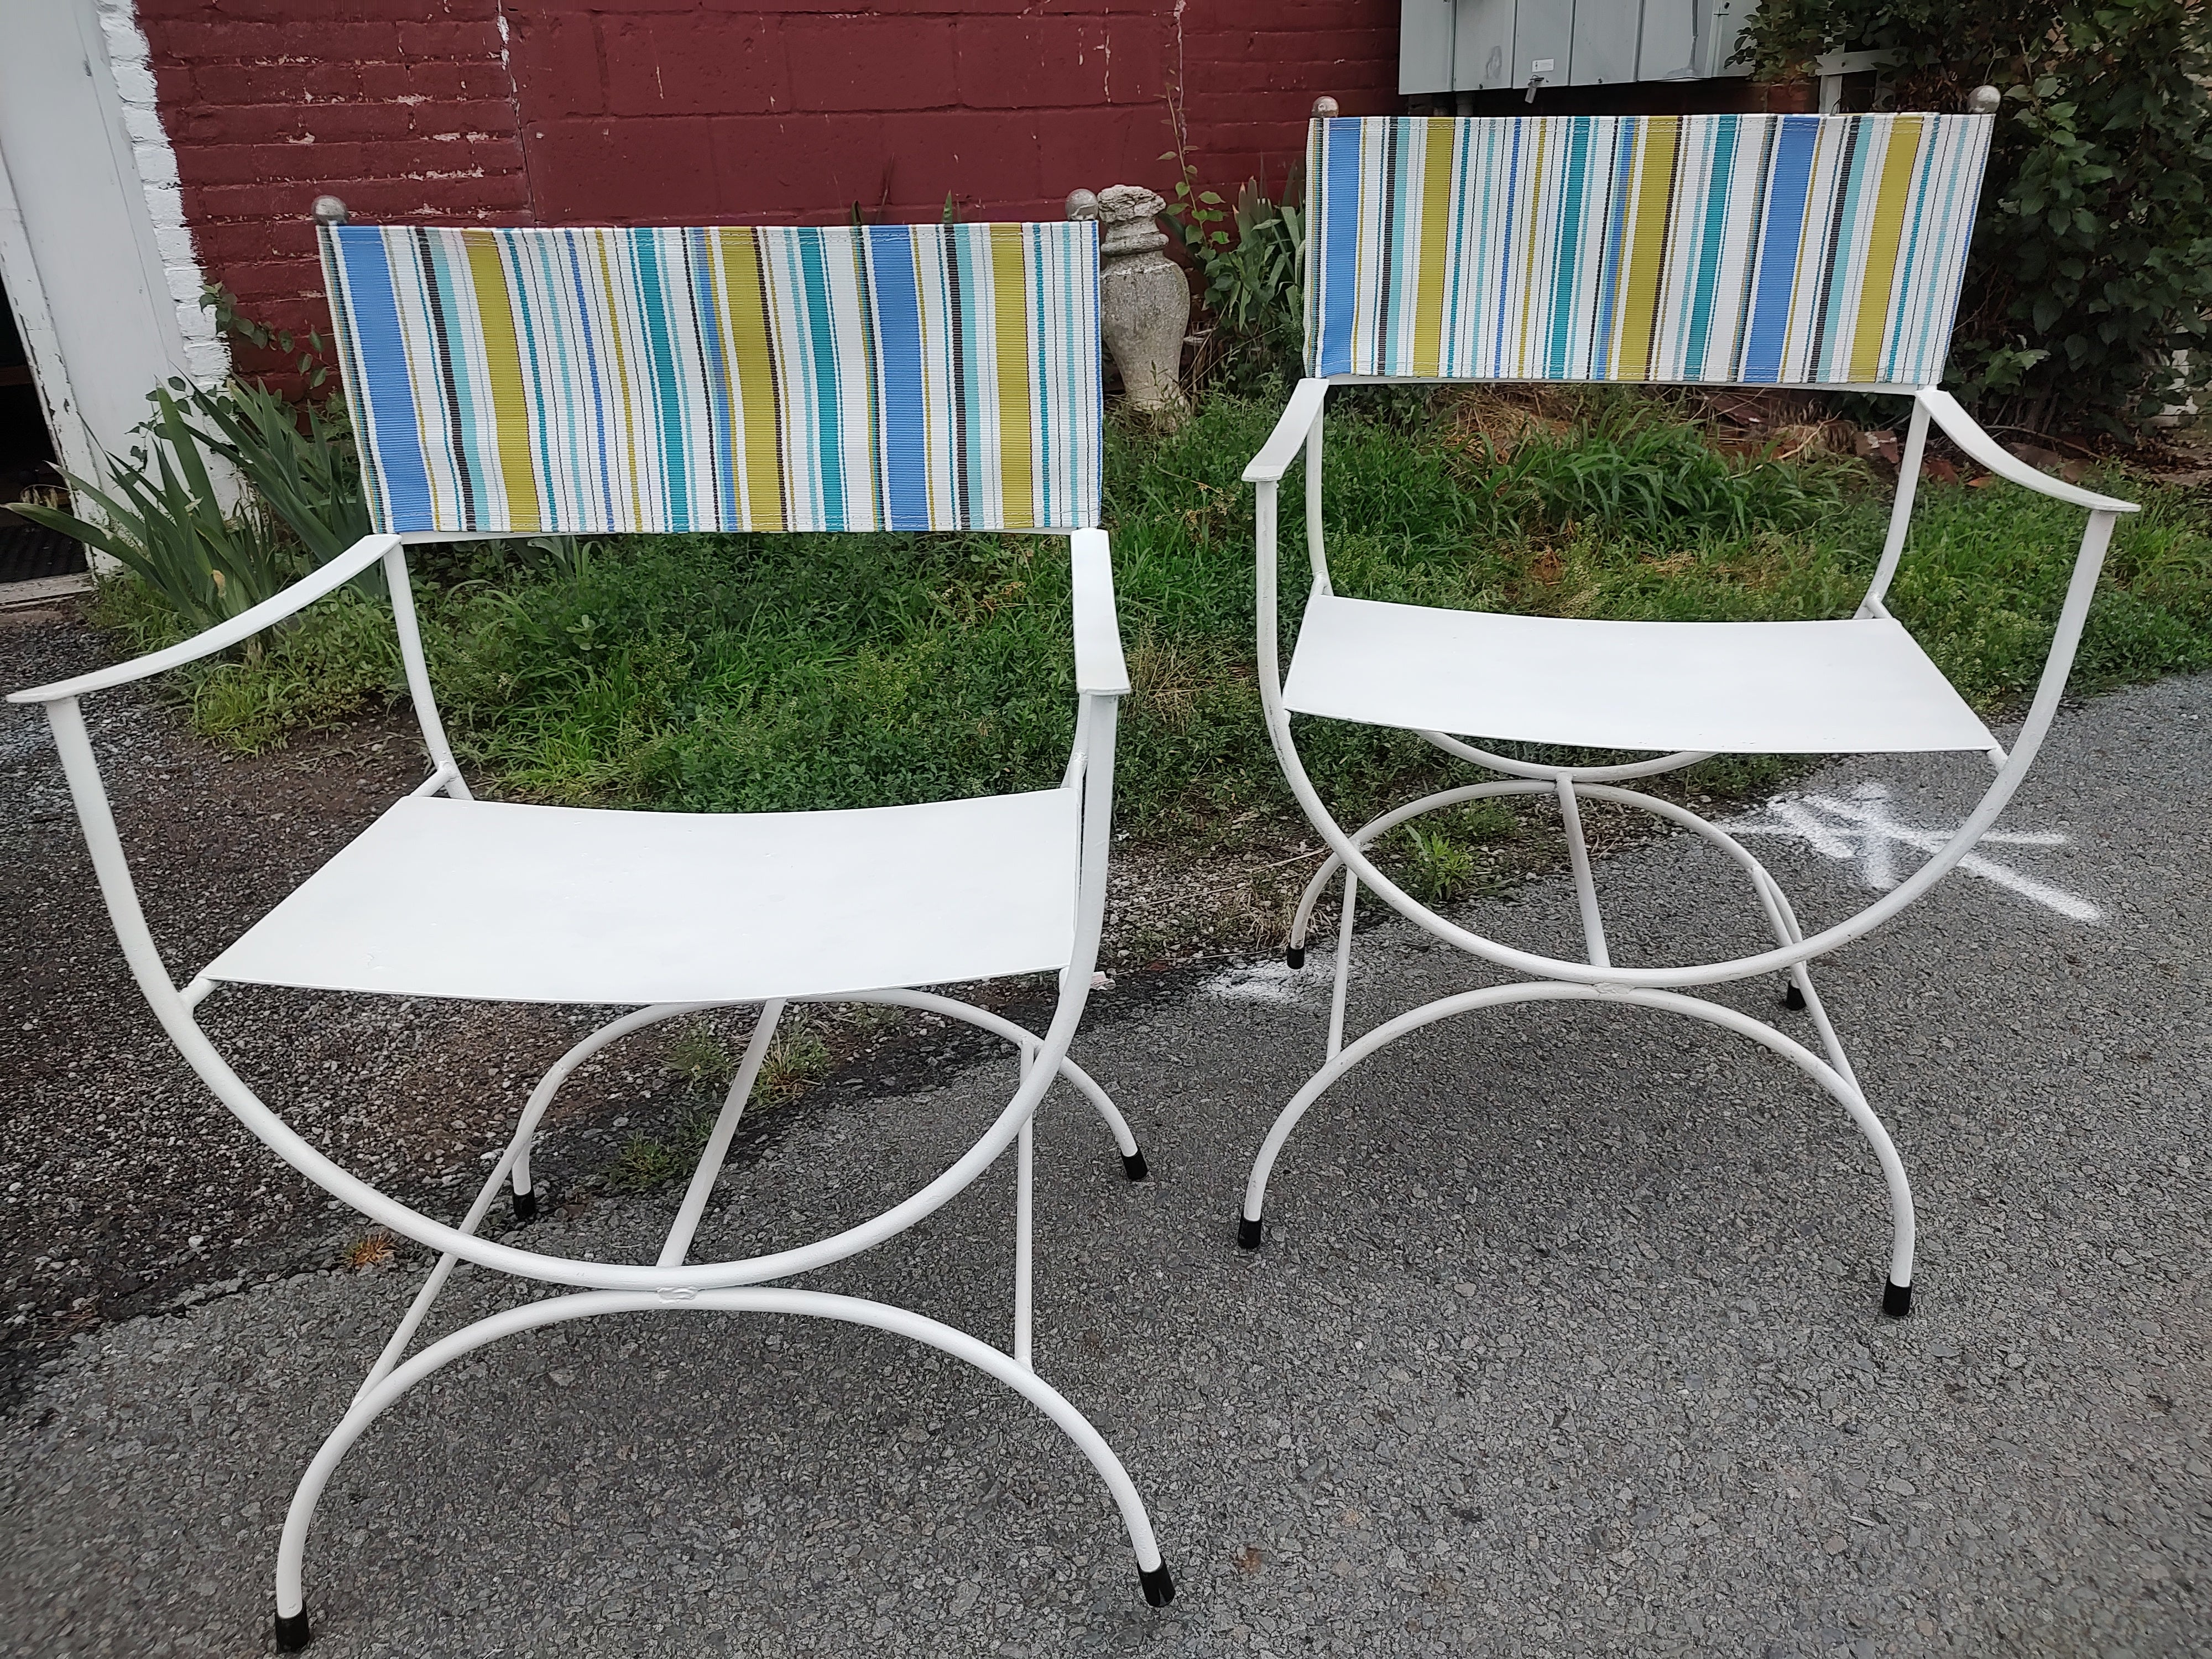 Pair of Mid Century Modern Patio Directors Chairs with Sunbrella Backs 1960 For Sale 3